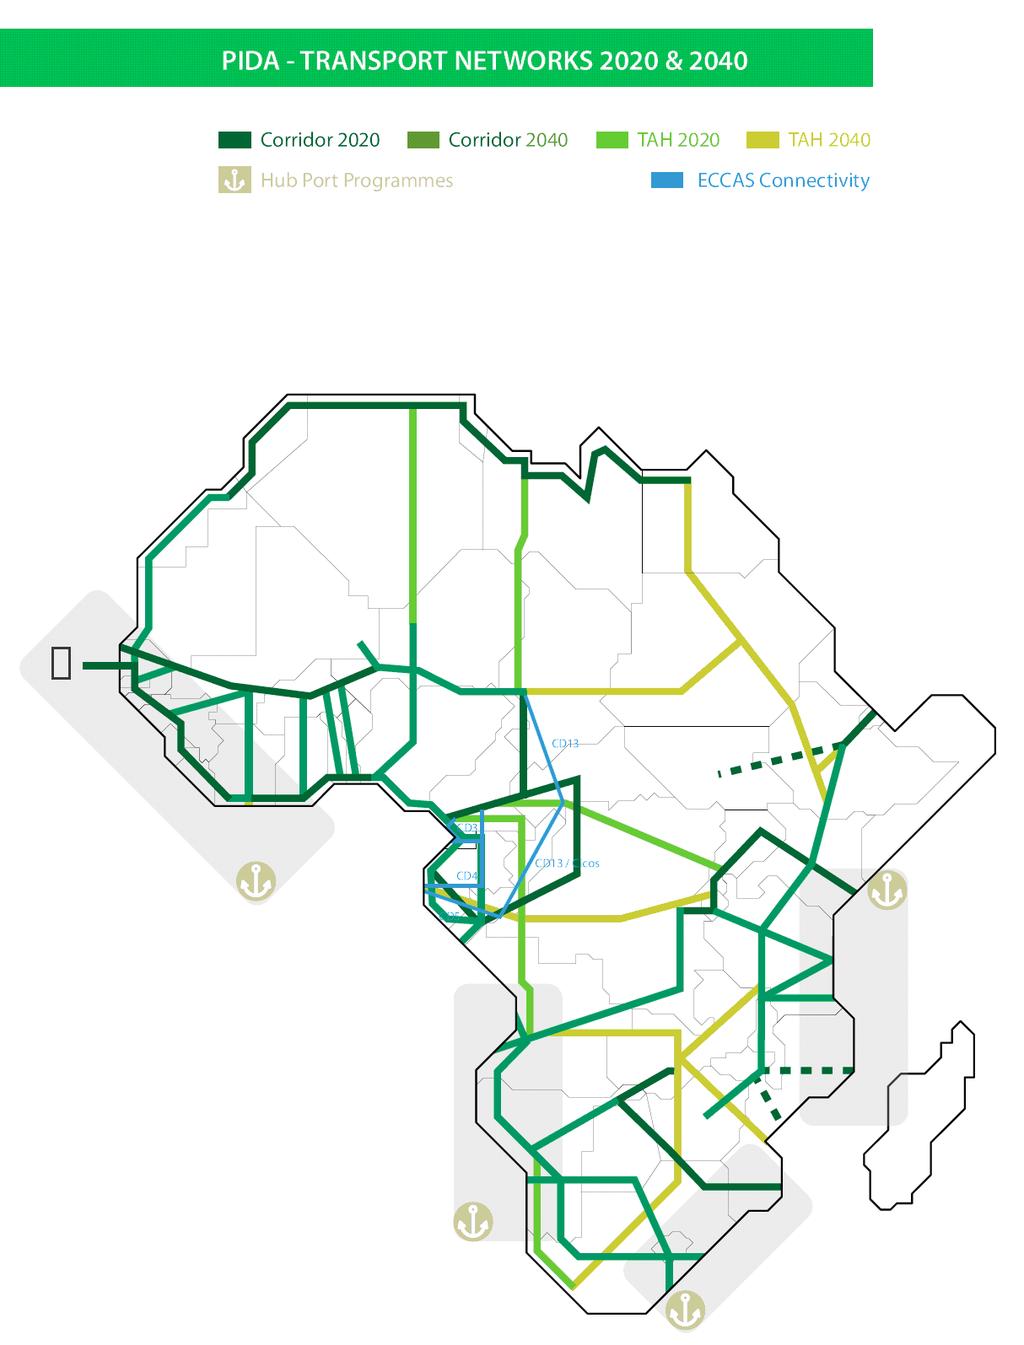 Transport Networks 24 items-usd 25 bn The transport program links the major production and consumption centers, provides connectivity among the major